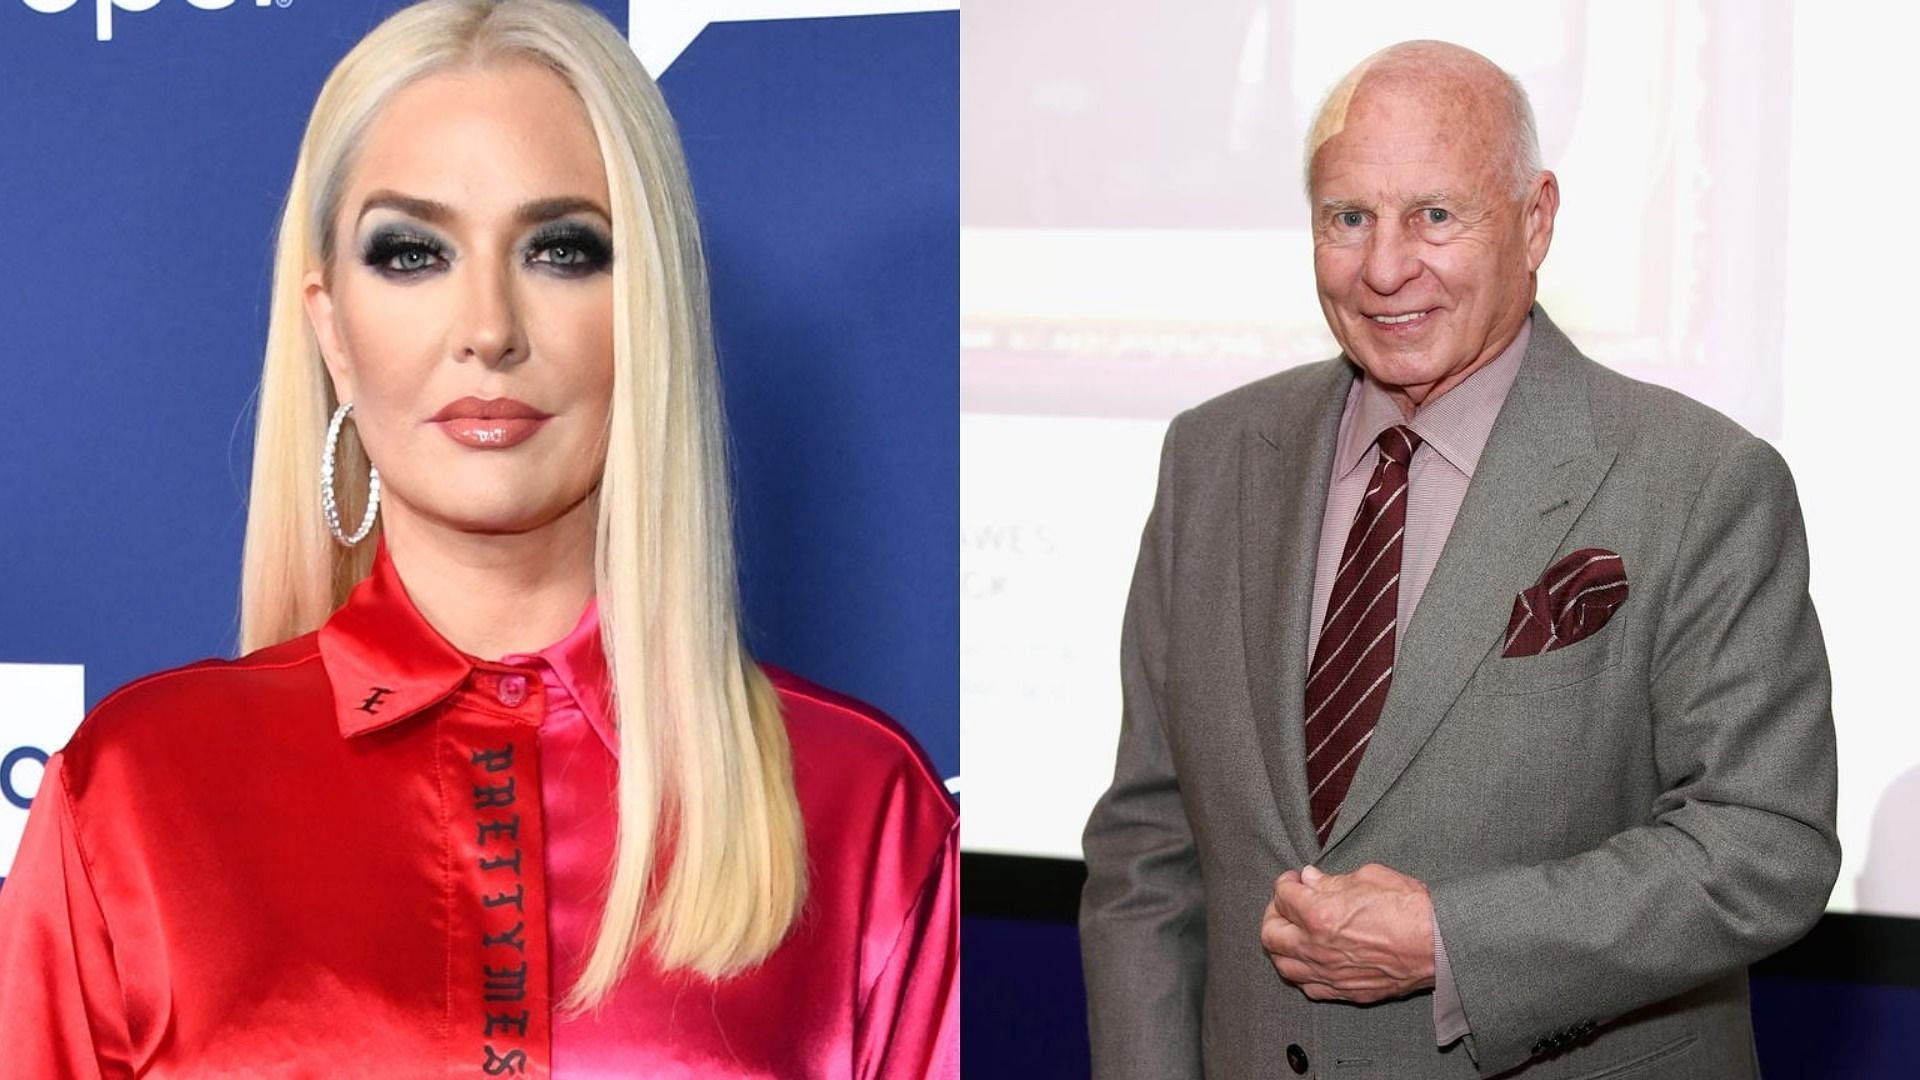 Erika Jayne and Tom Girardi were accused of embezzling money meant to help the victims of Lion Air Flight 610 (Image via Getty Images/ Dimitrios Kambouris/ Joe Scarnici)